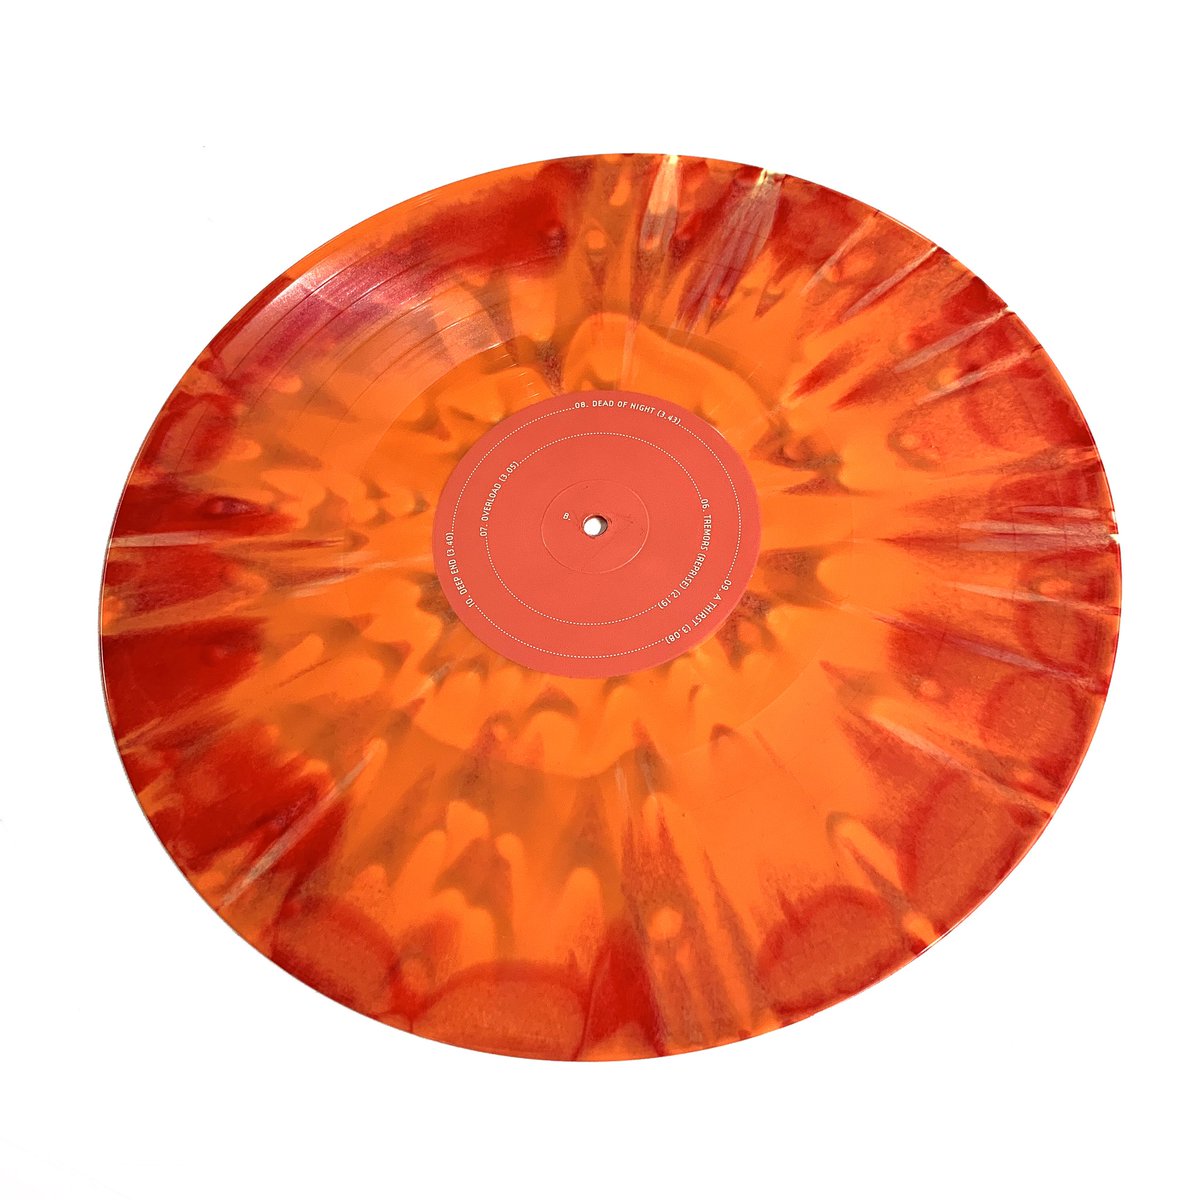 Got some proper snaps of the vinyl edition of the new @TheKVB LP ‘Tremors’. Full colour CMYK and Pantone Fluoro 805C throughout. This is the @invadarecordsUK exclusive red/orange swirl edition which is selling out fast.